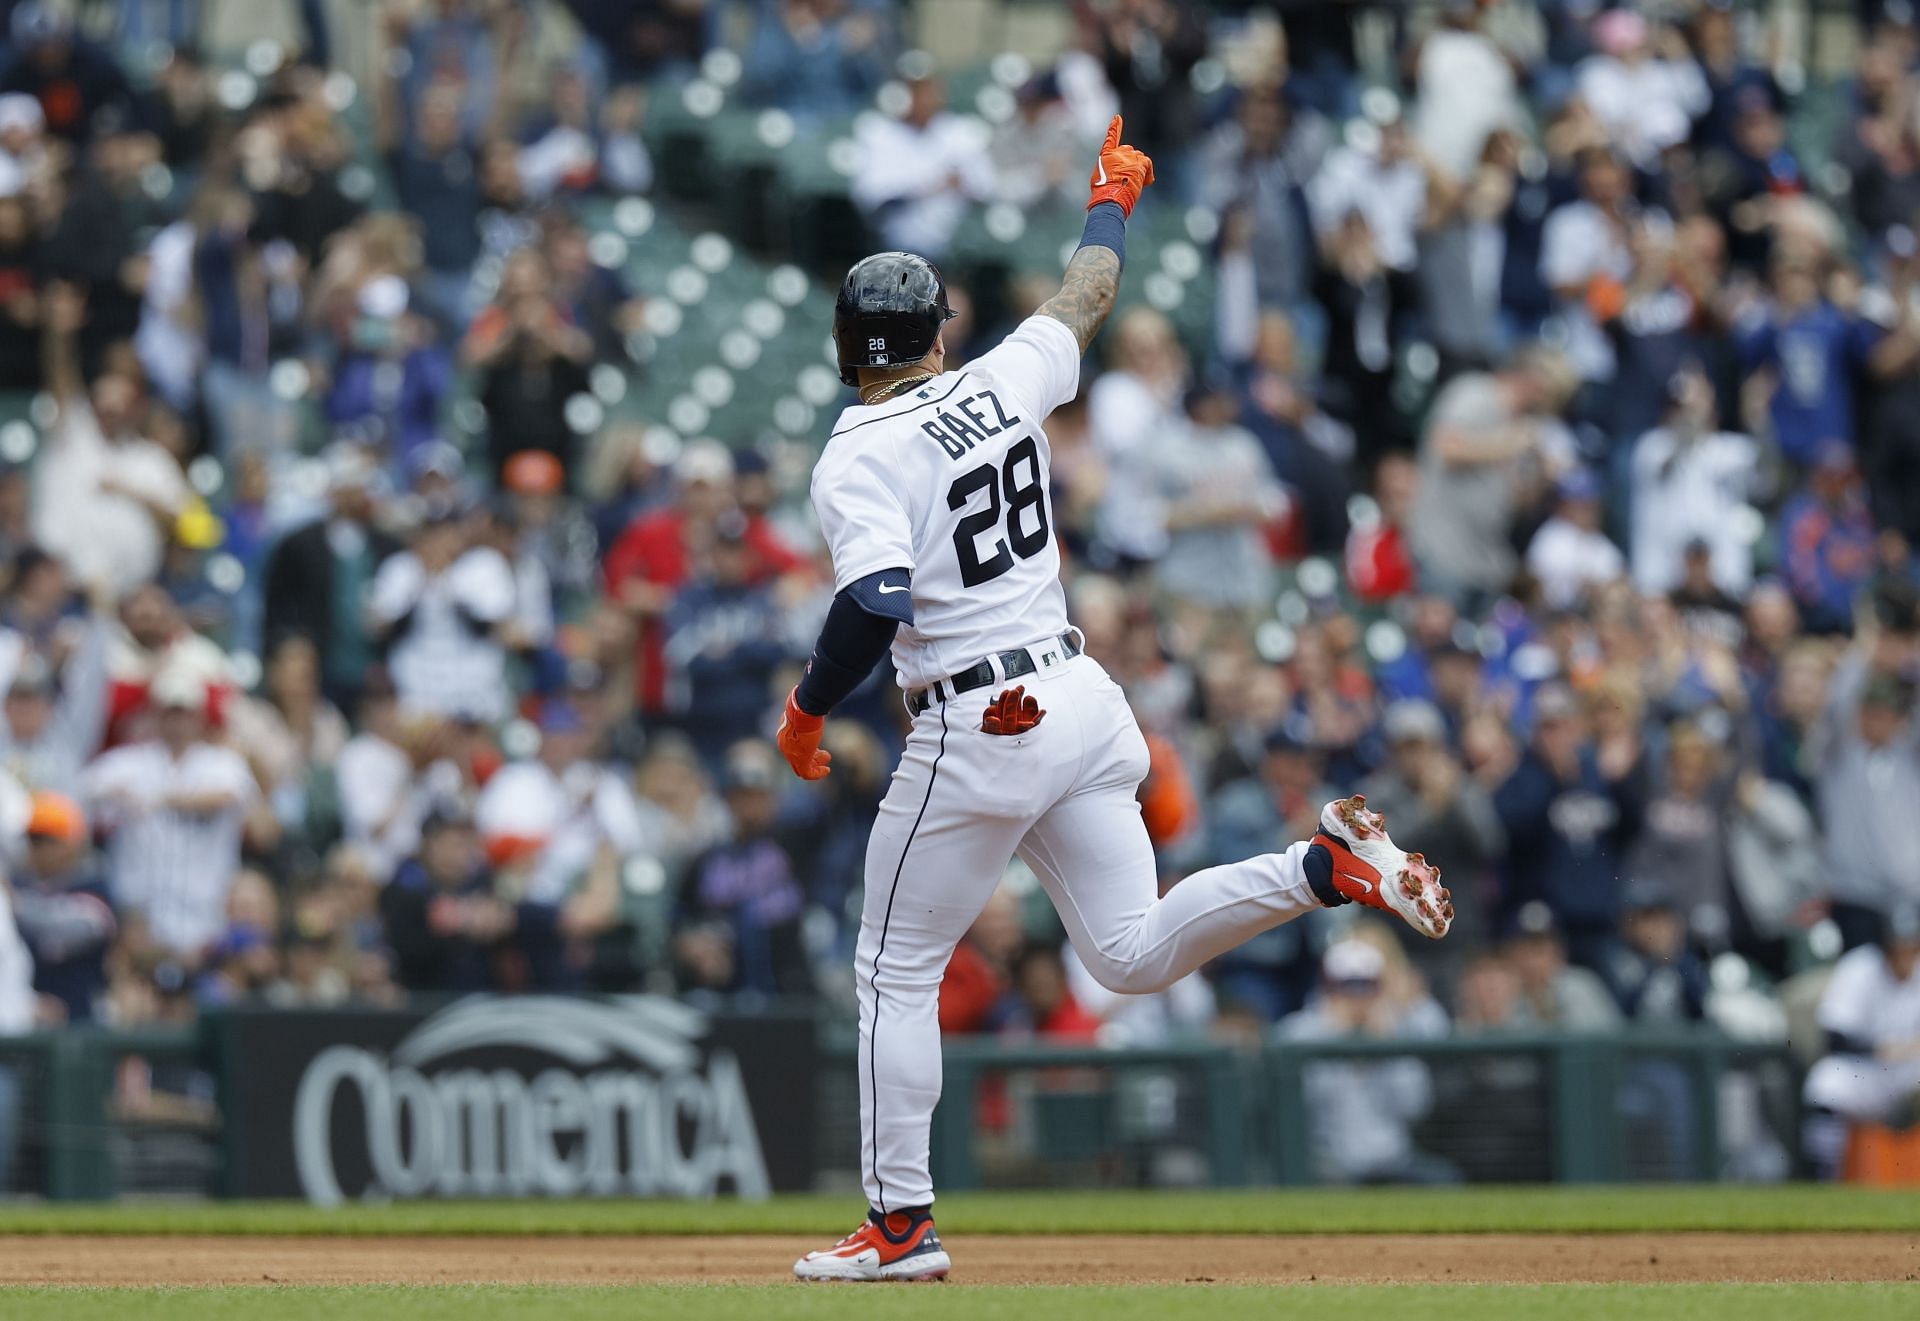 Javy Baez Has Been an Enormous Bust for the Detroit Tigers